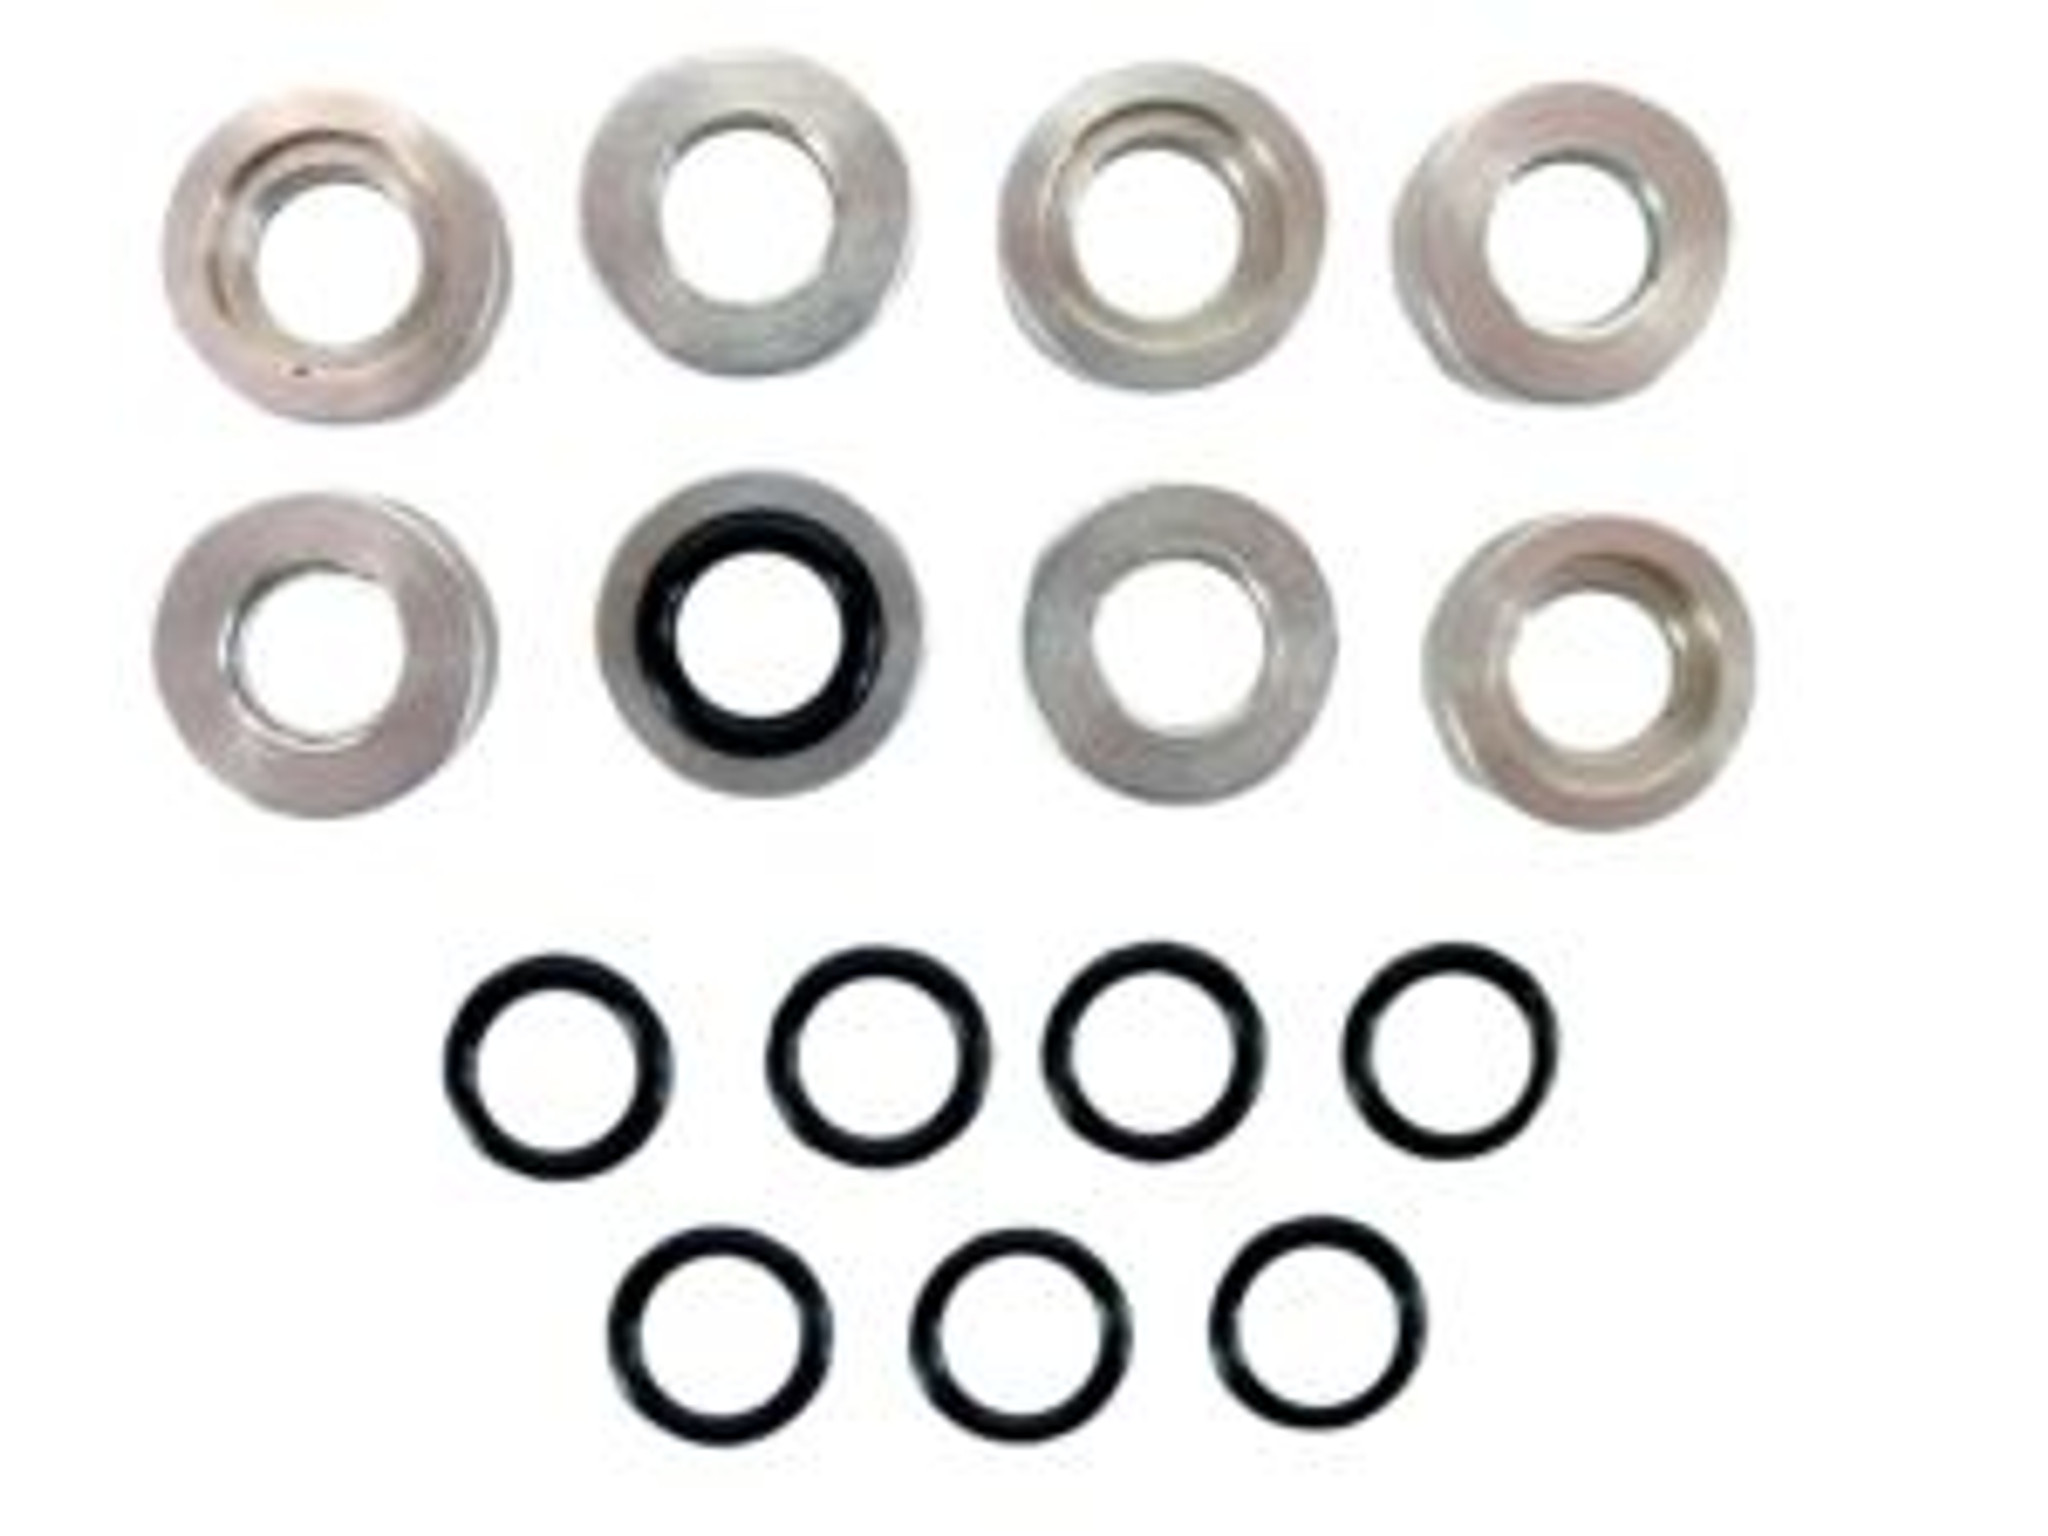 O ring seal (AC system) (2 required per car) - Pièces DeLorean Suisse